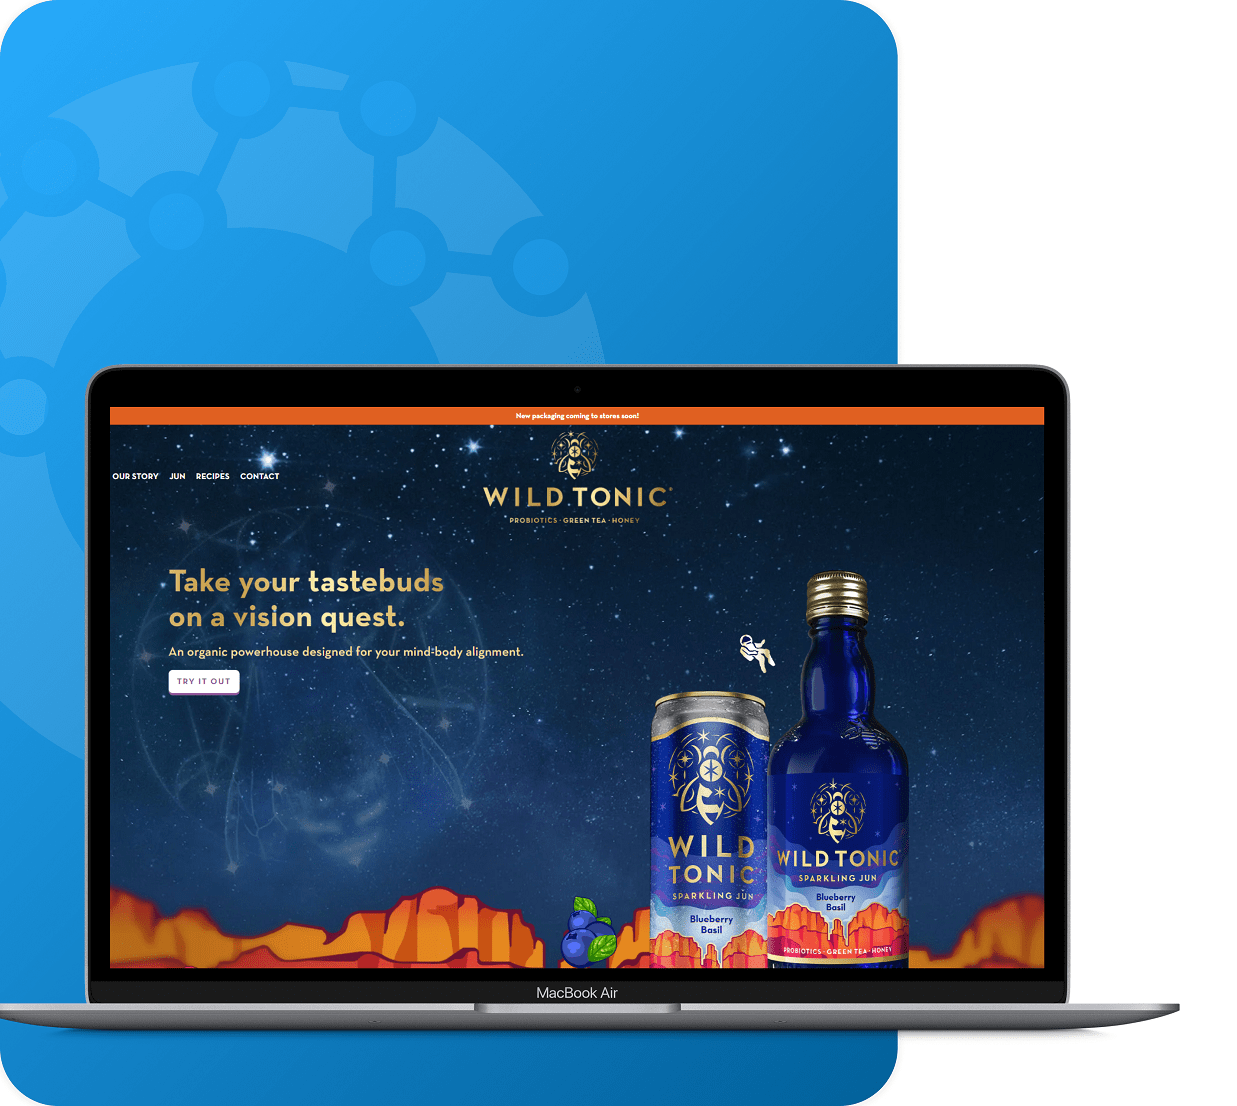 wild tonic case study for wordpress/shopify development services by ropstam solutions